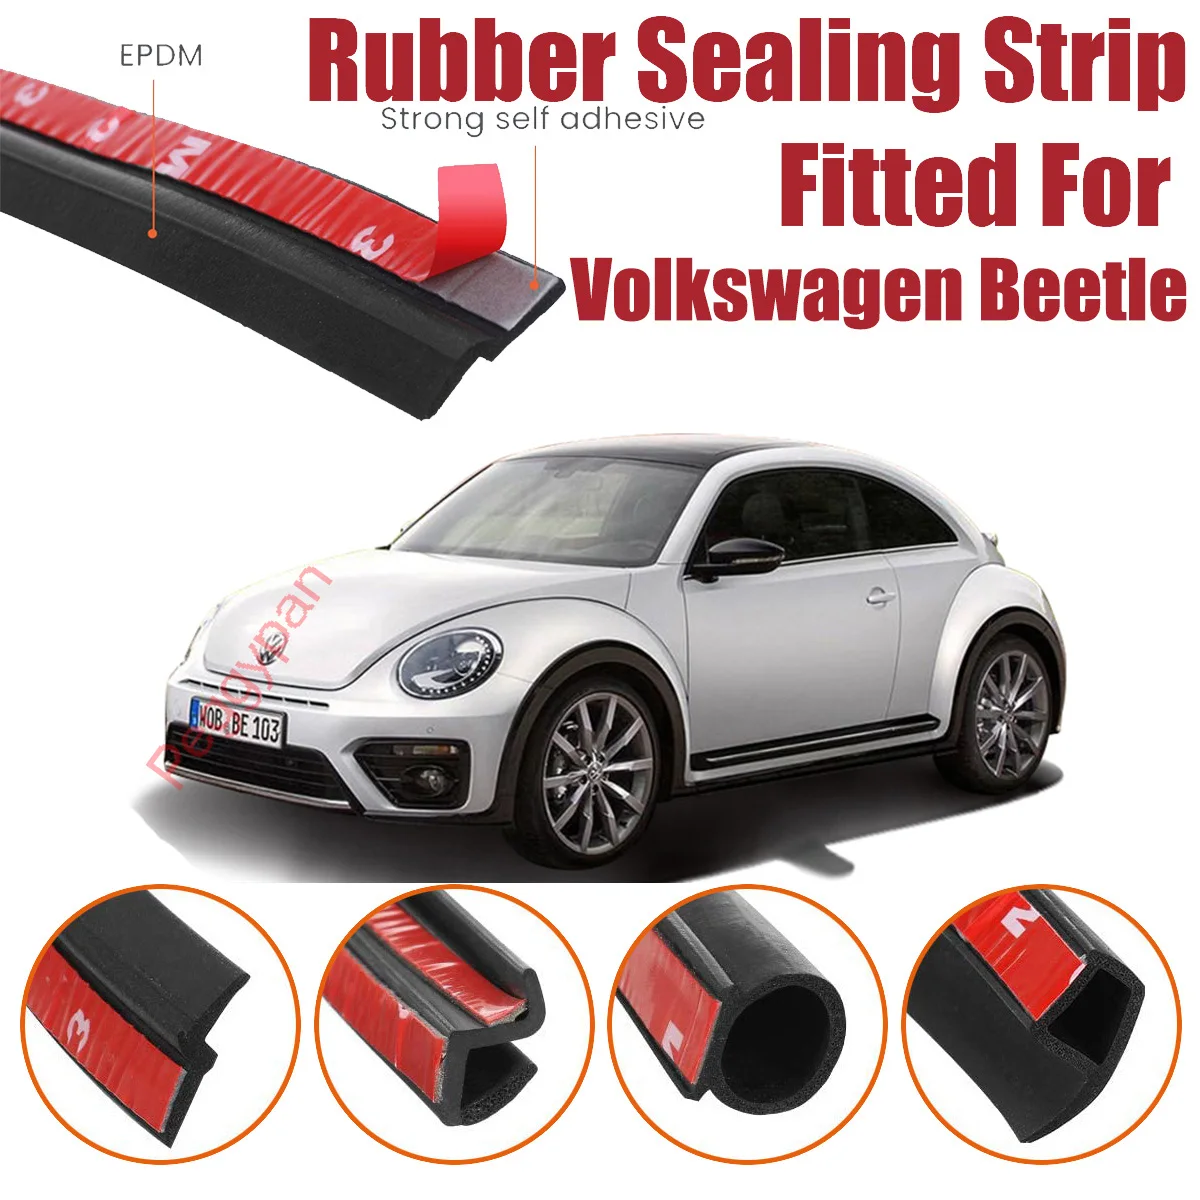 Door Seal Strip Kit Self Adhesive Window Engine Cover Soundproof Rubber Weather Draft Noise Reduction For Volkswagen Beetle